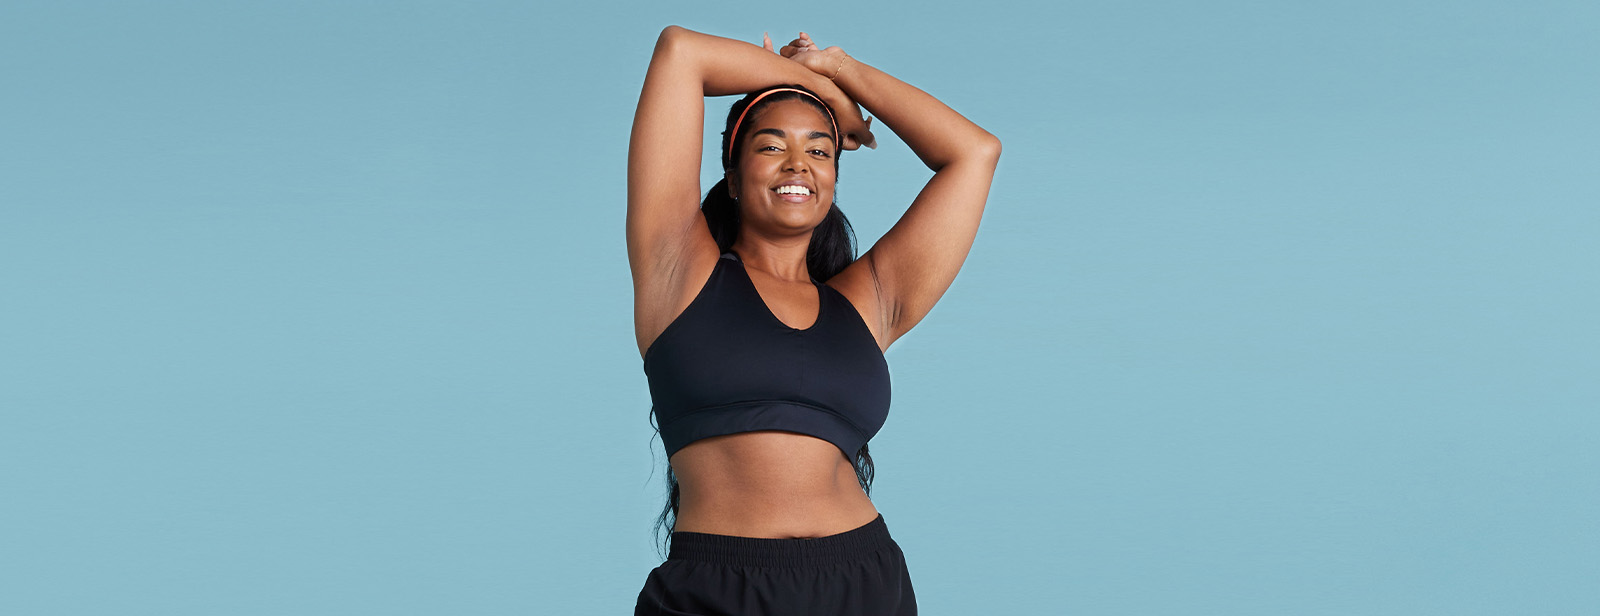 Could This Be the Perfect Sports Bra for Pickleball? — Pickleball